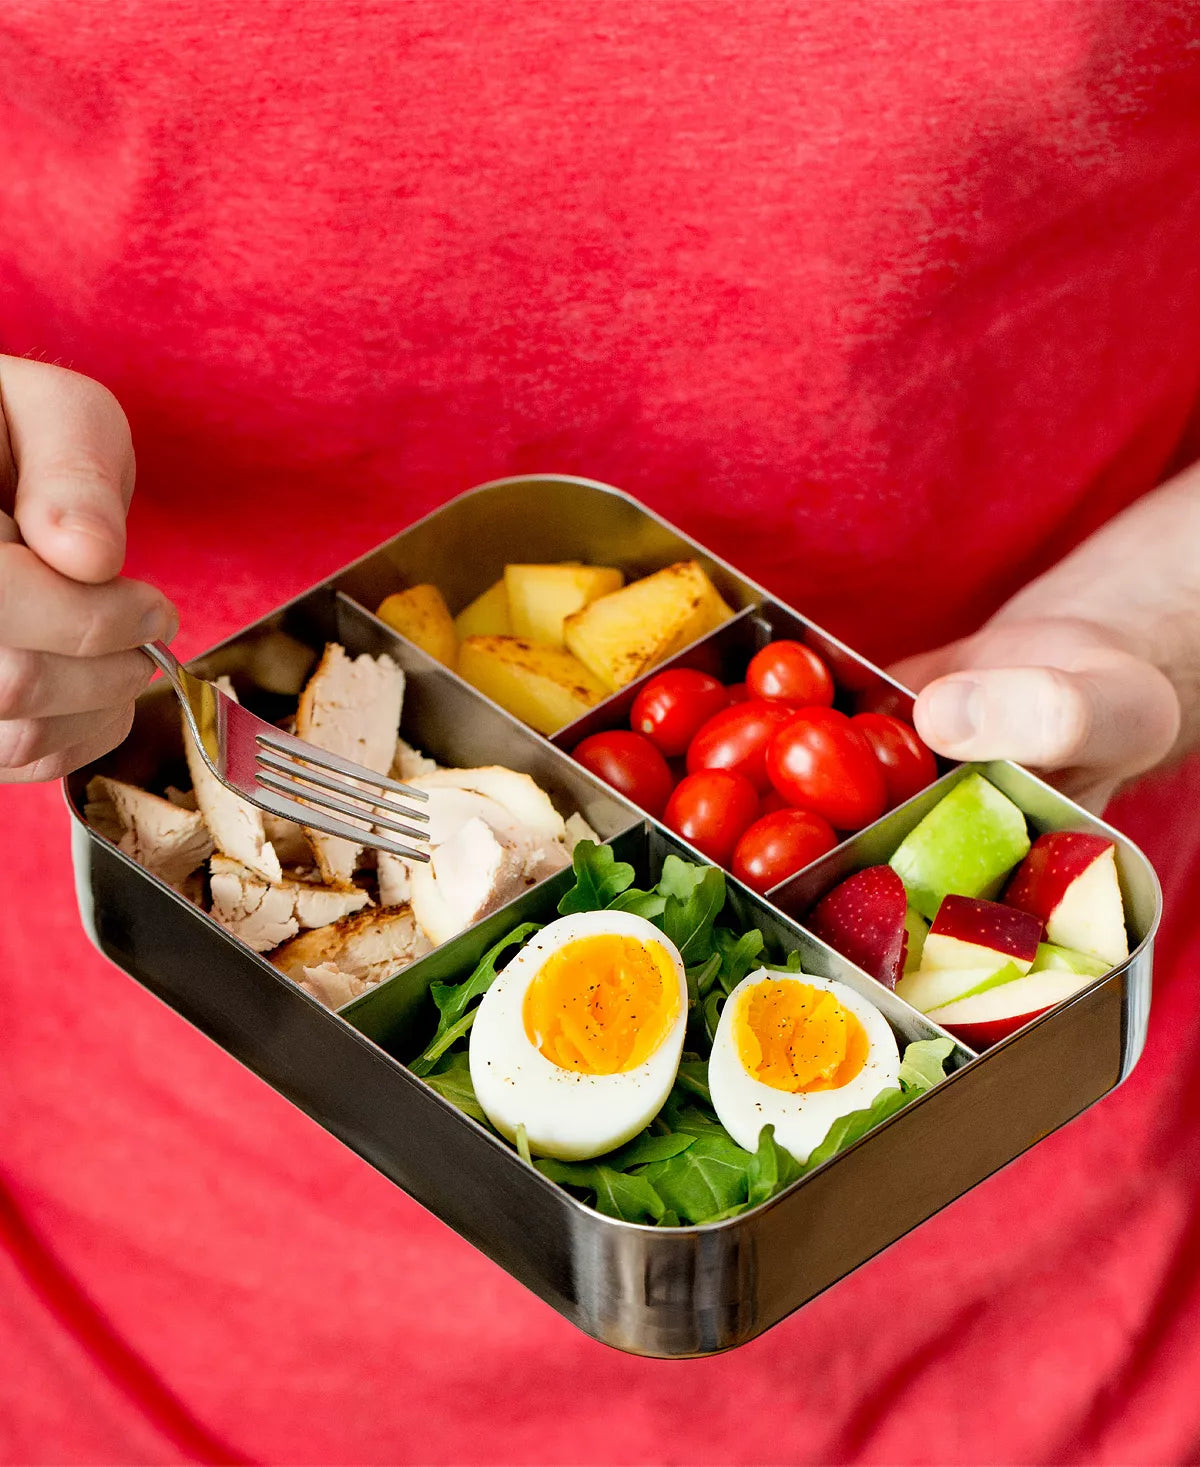 This spacious, stainless steel bento box features five compartments, making it easy for you to add variety to your child’s meal. Kids love the cinco because it keeps food neat and separate without the need for multiple containers.